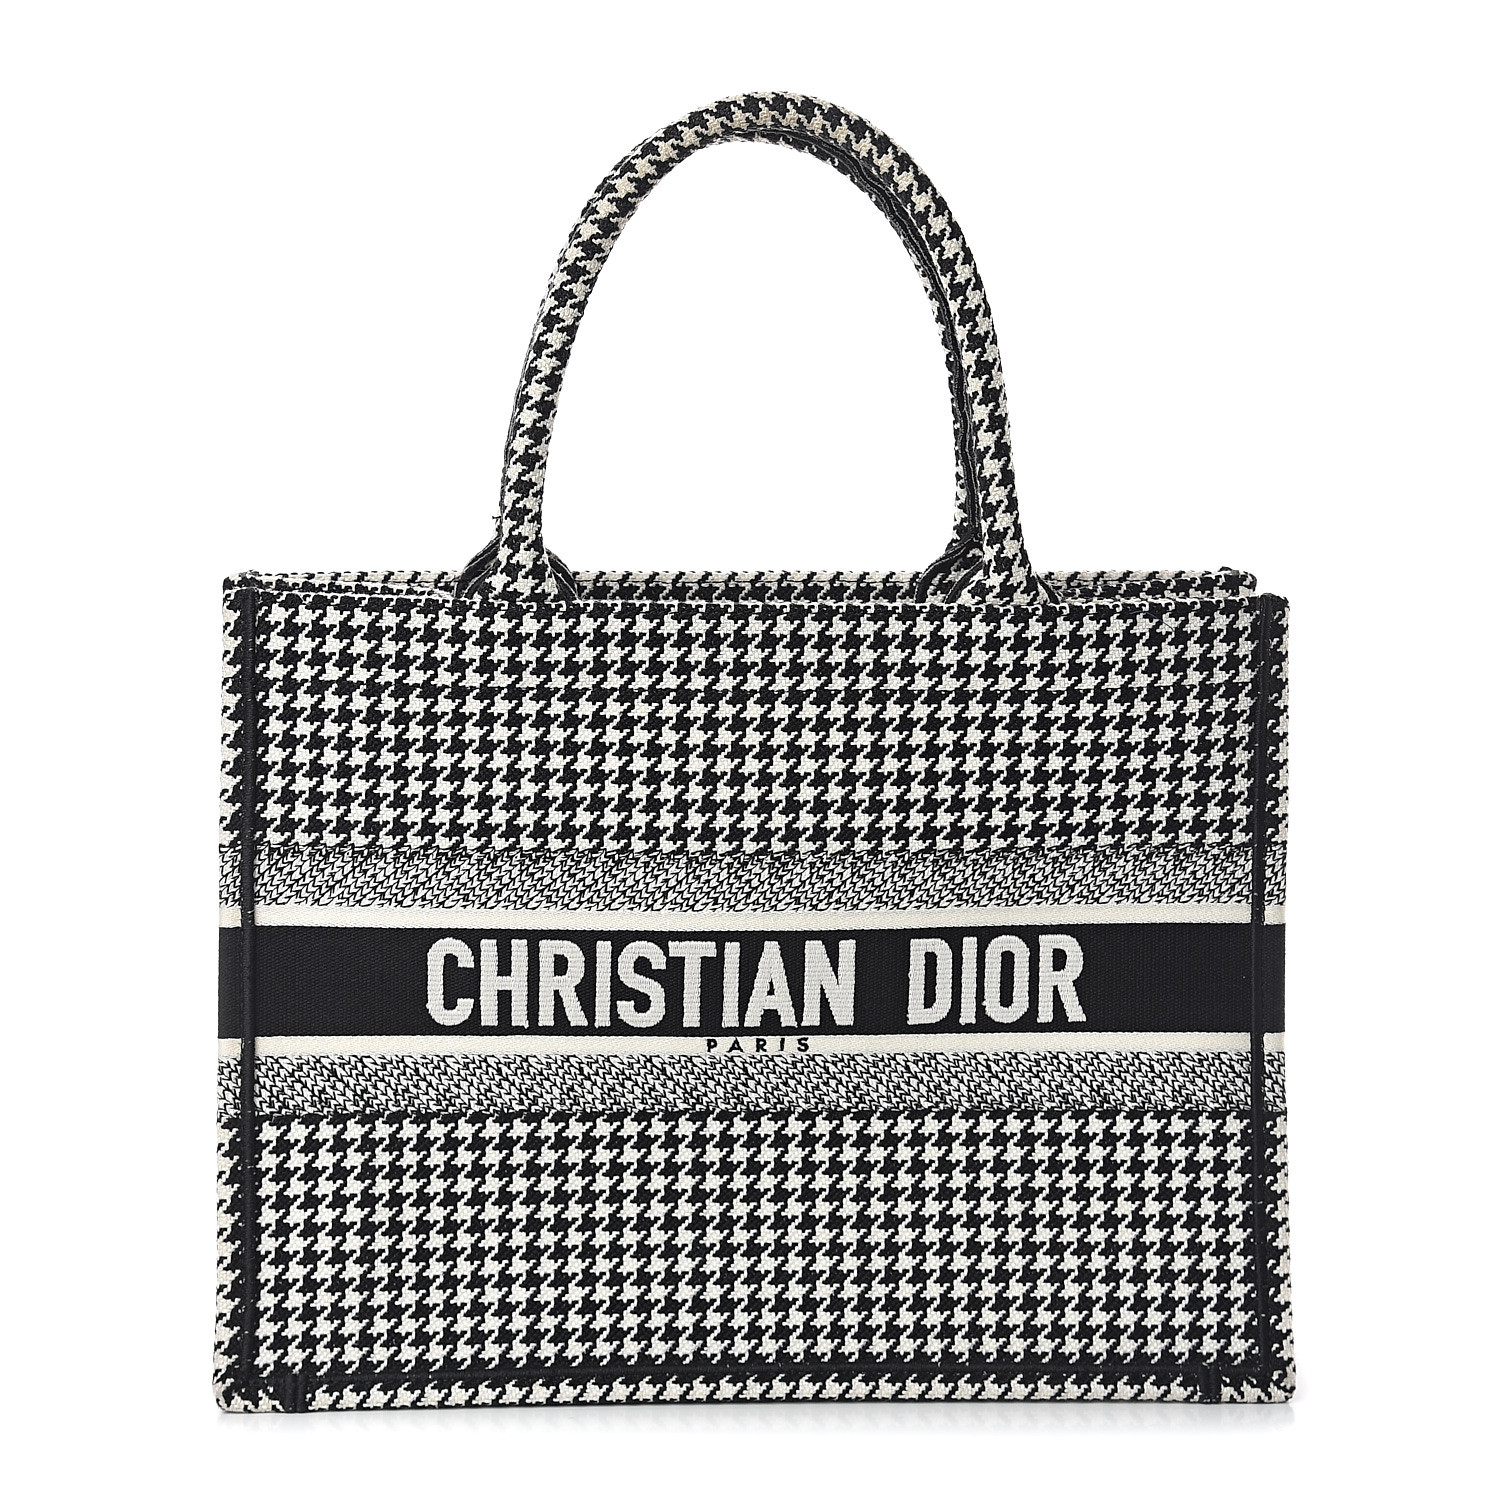 CHRISTIAN DIOR Embroidered Canvas Houndstooth Small Book Tote Black White 542257